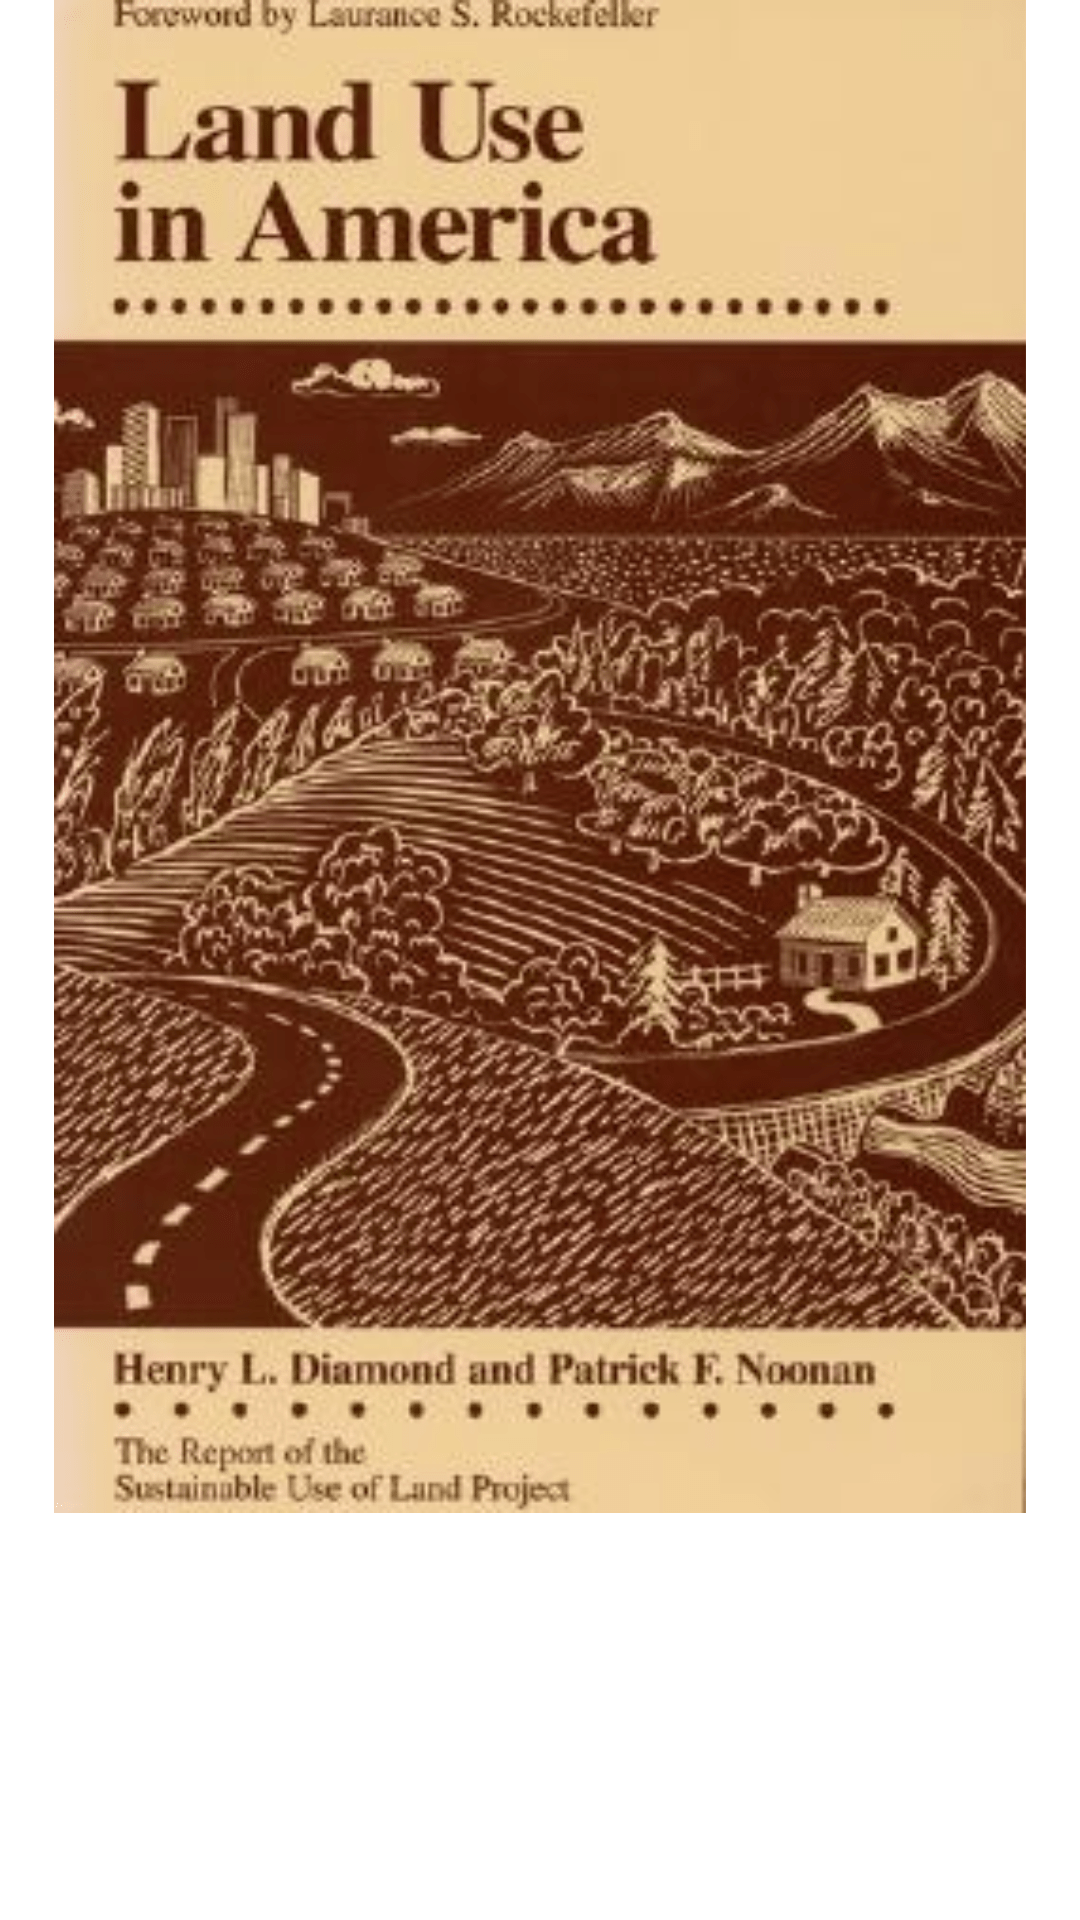 Land Use in America by Henry L. Diamond